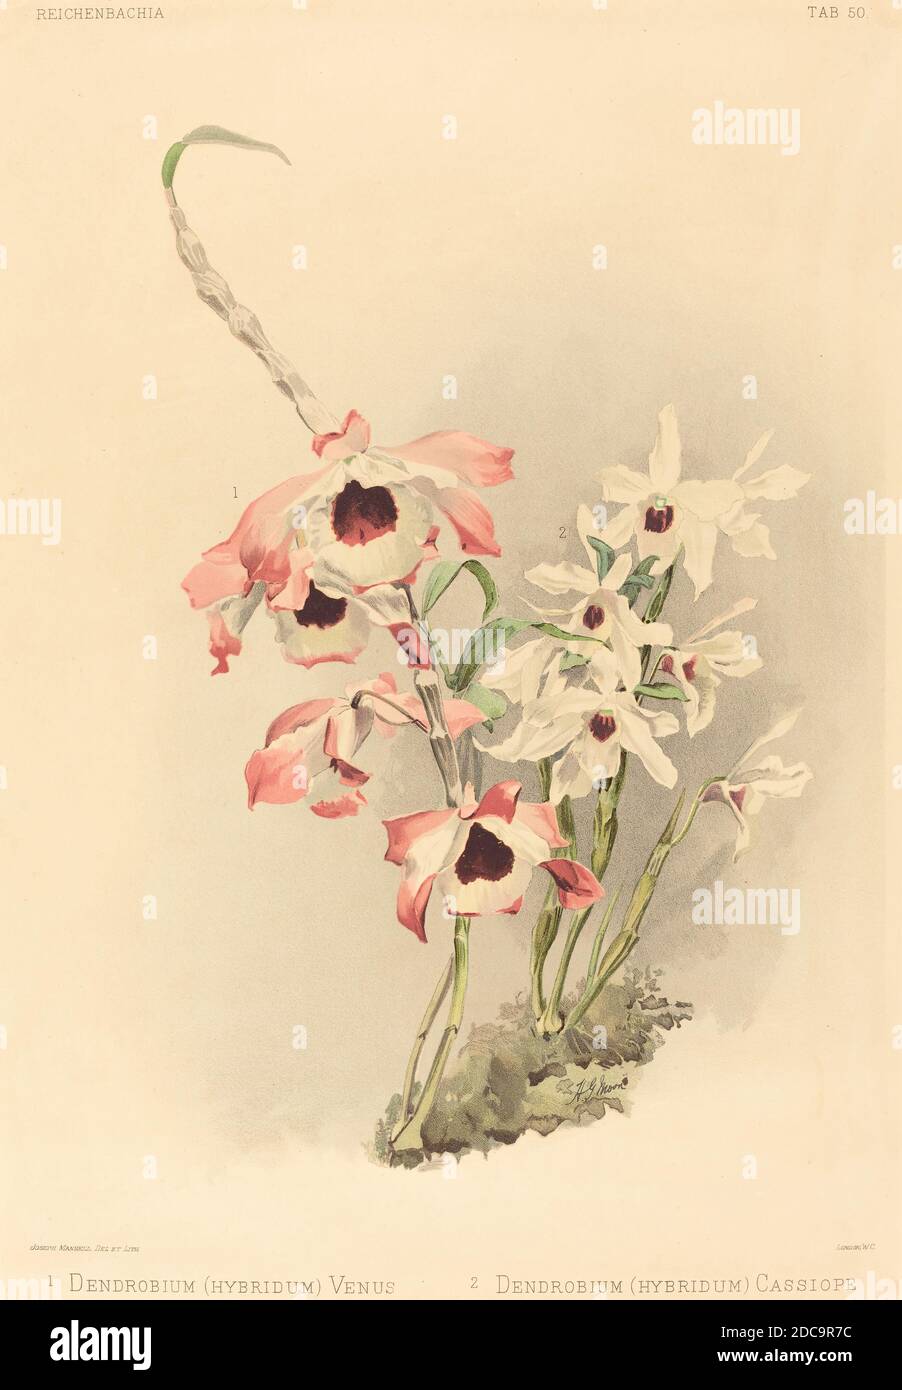 Joseph Mansell, (artist), British, active 19th century, Henry George Moon, (artist after), British, 1857 - 1905, Dendrobium (Hybridium) Venus and Dendrobium (Hybridium) Cassiope, Sander's 'Reichenbachia': pl.50, (series), color lithograph Stock Photo